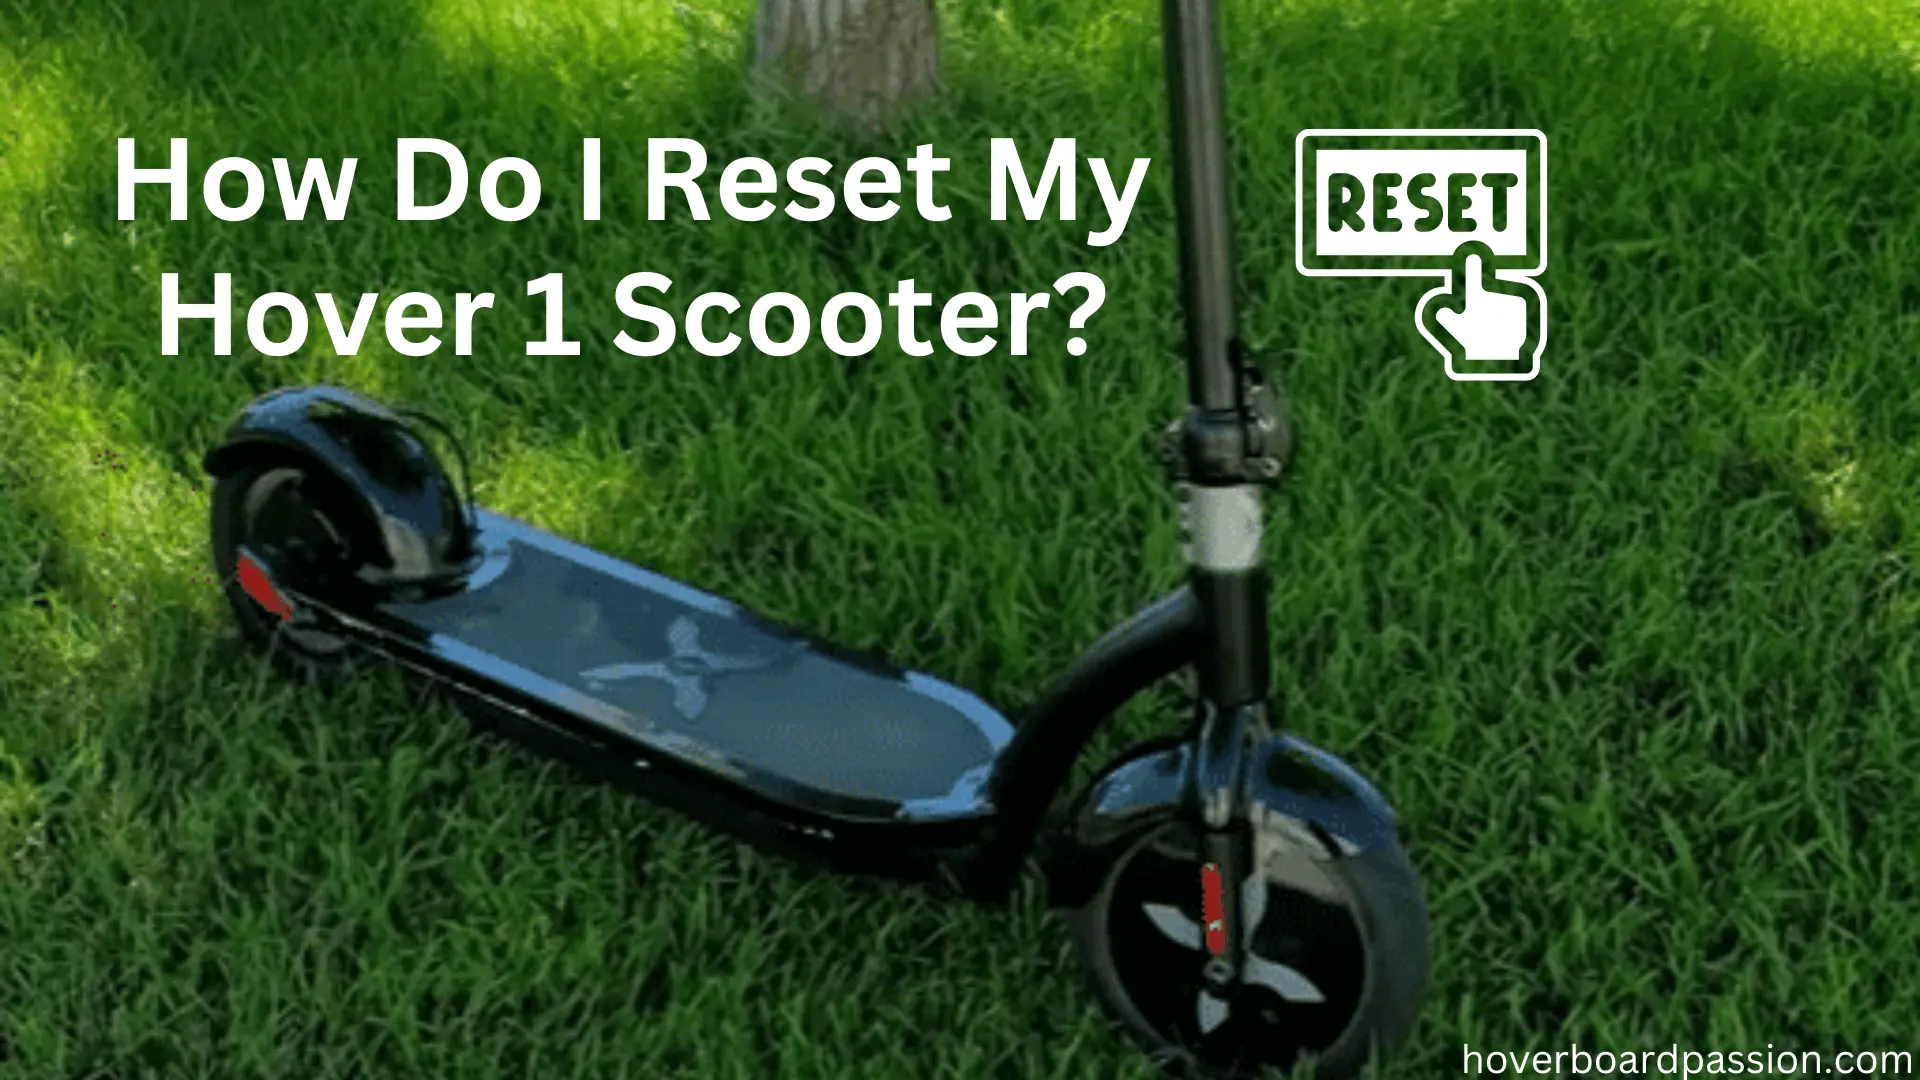 How Do I Reset My Hover 1 Scooter?